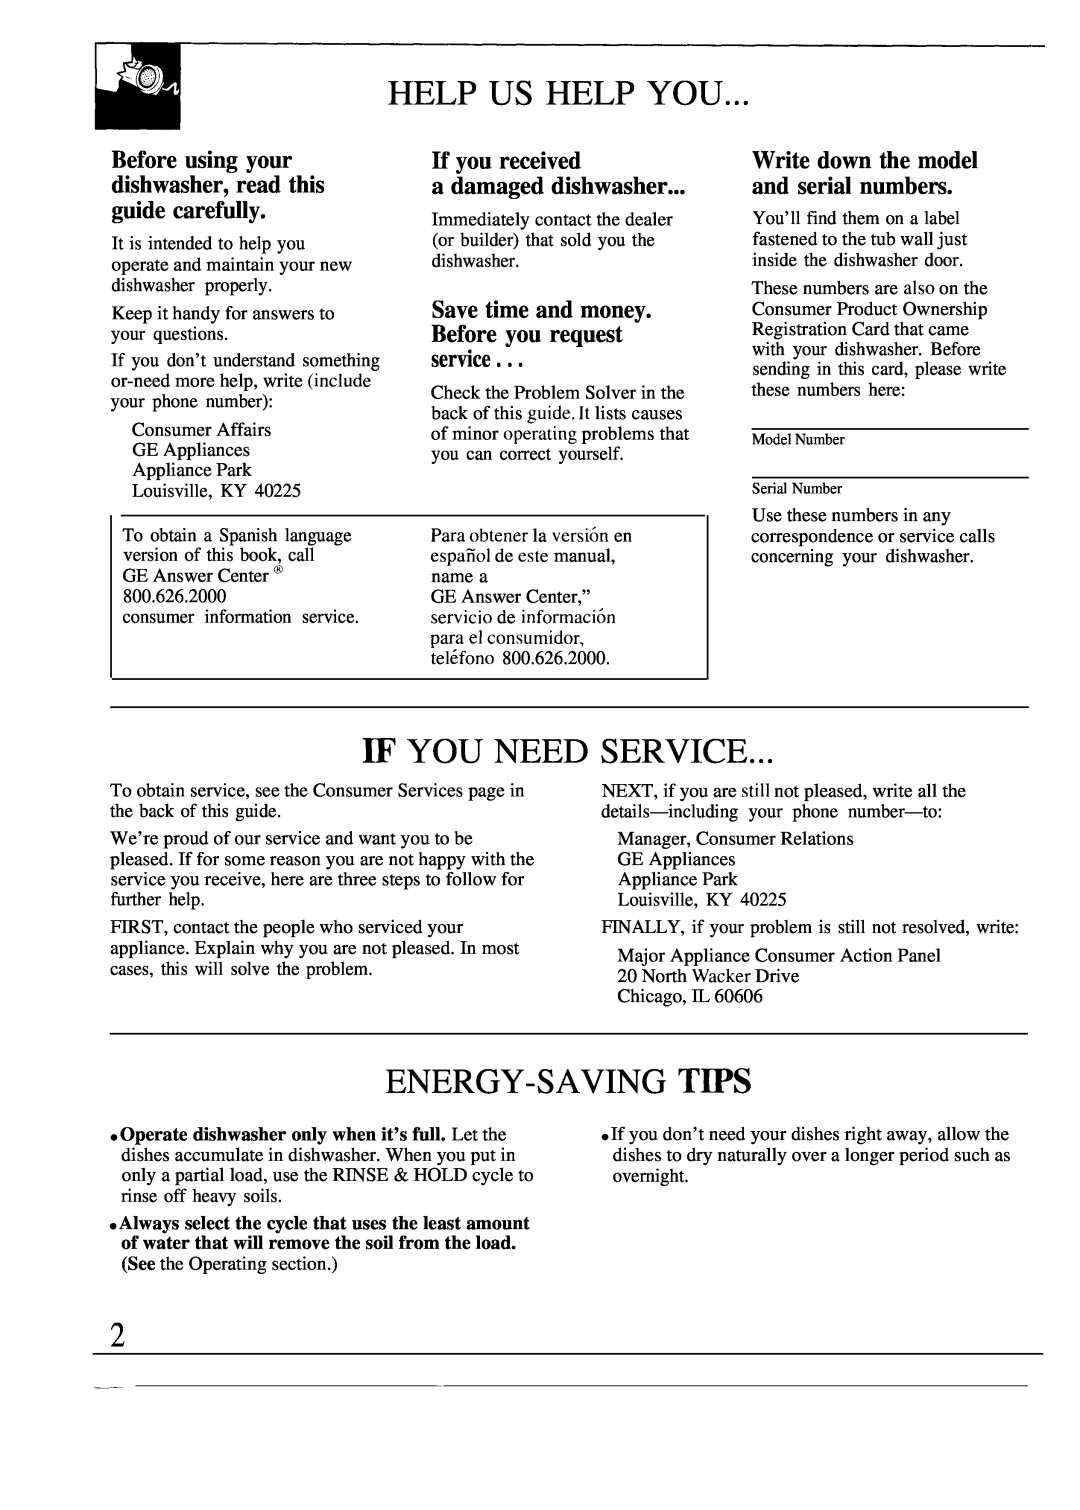 GE GSD950 Help Us Help You, ~ You Need Service, Energy-Saving Tws, Before using your dishwasher, read this guide carefully 